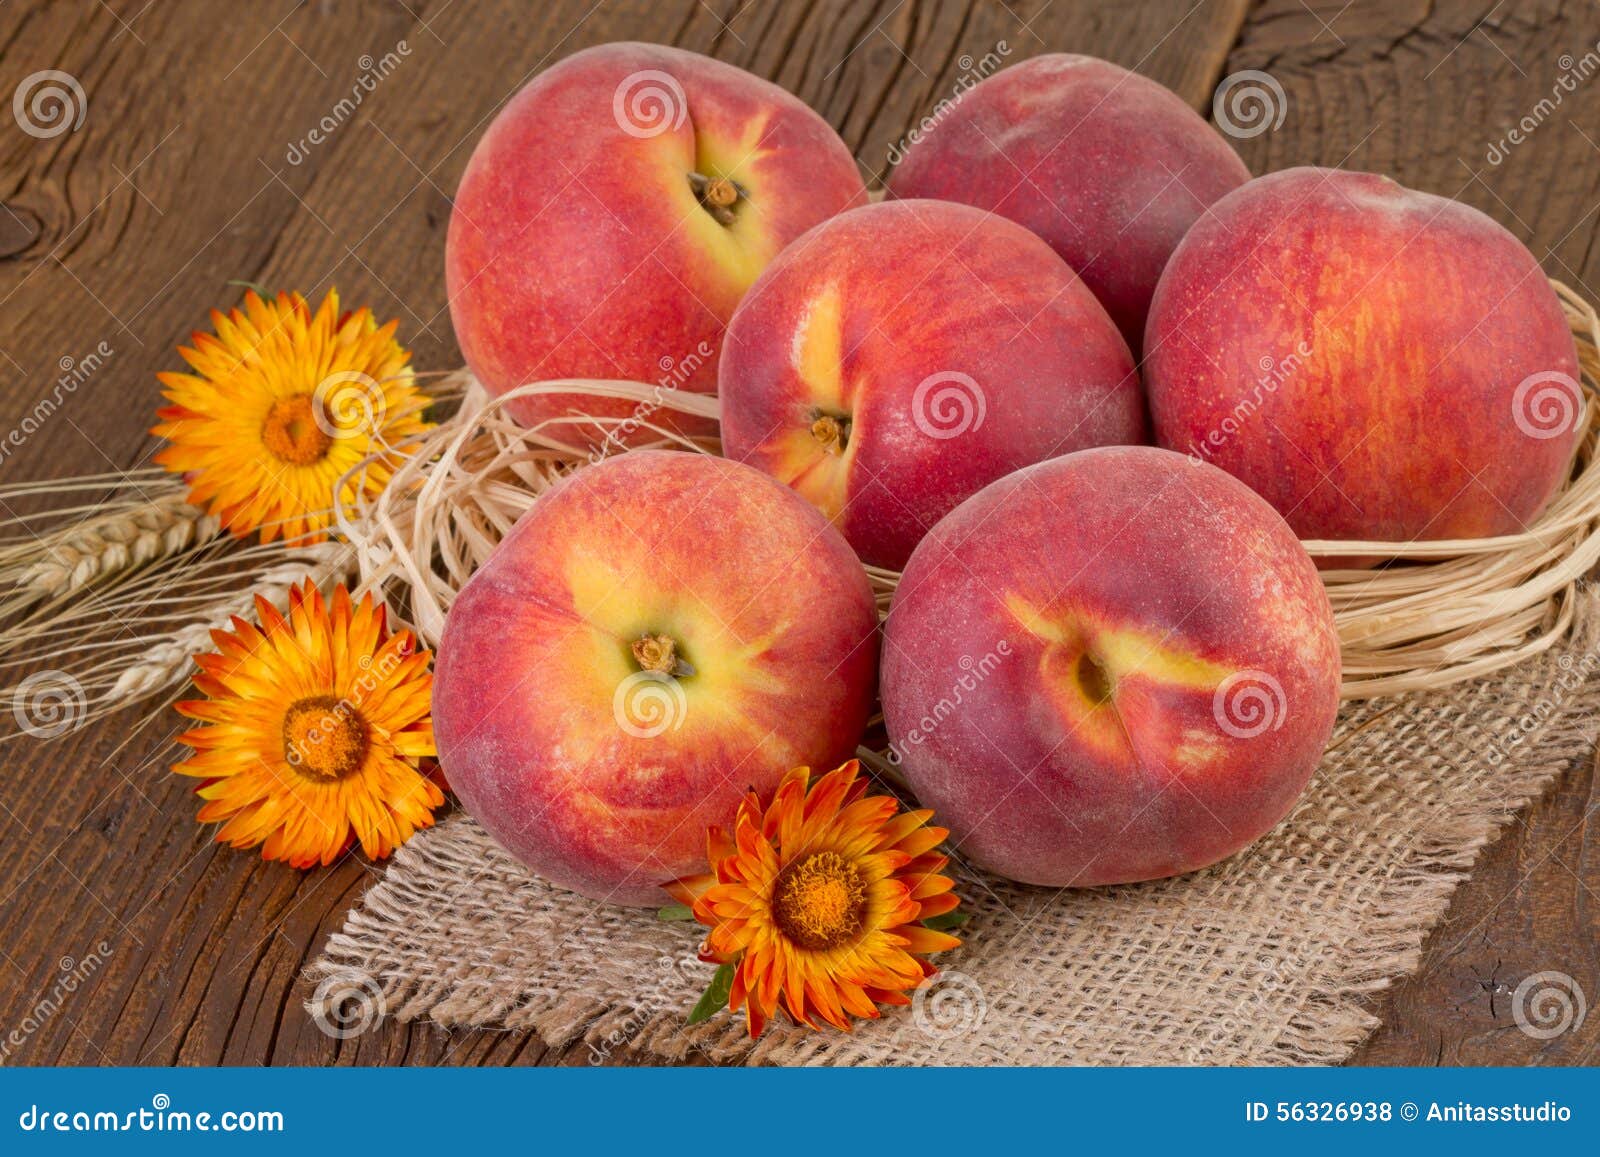 3,467 Still Life Peaches Stock Photos - Free & Royalty-Free Stock Photos  from Dreamstime